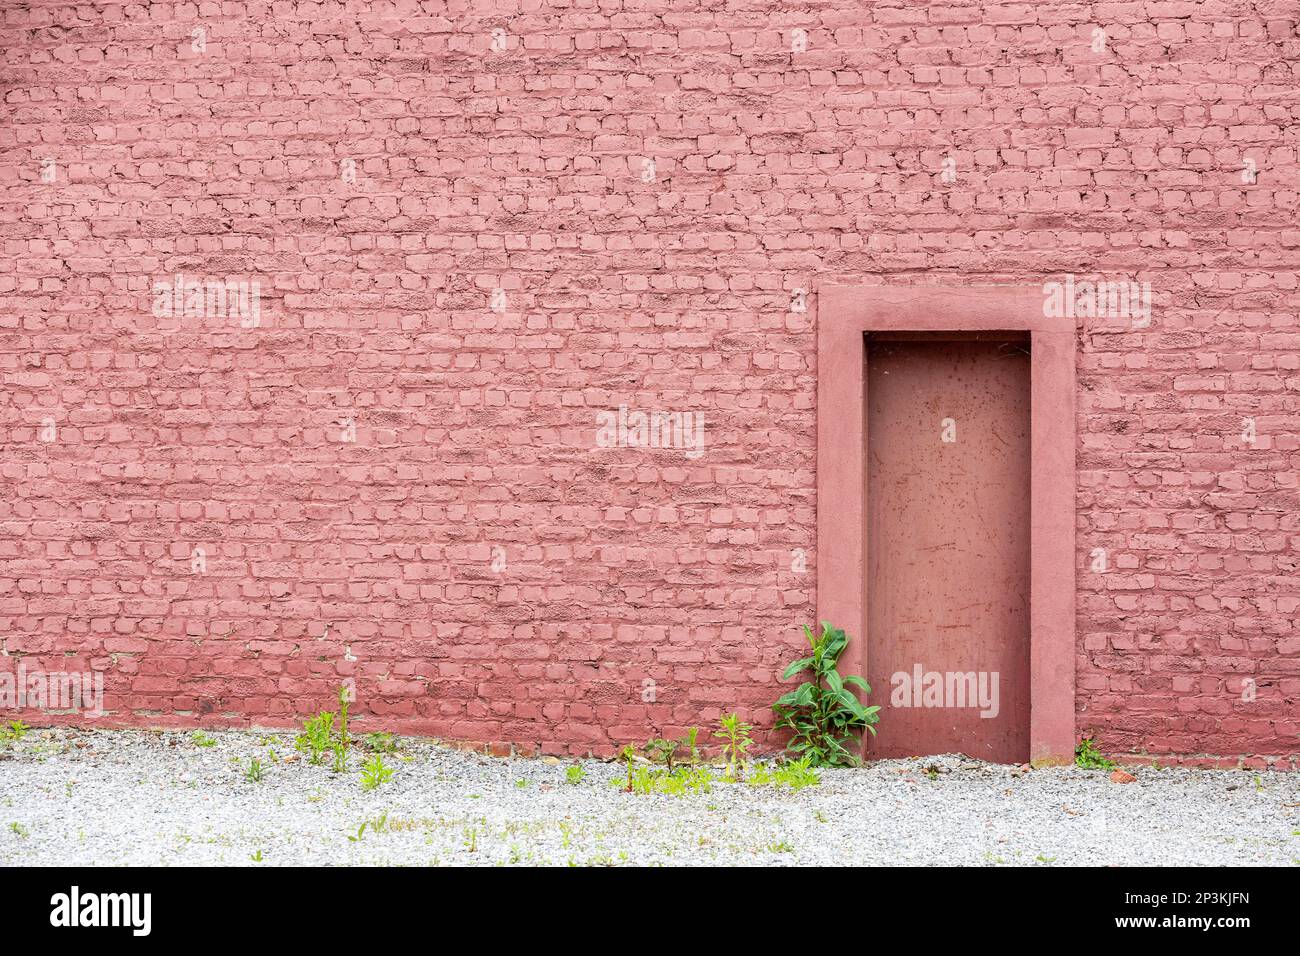 Bricked up door in a pink painted brick wall. Brussels. Stock Photo